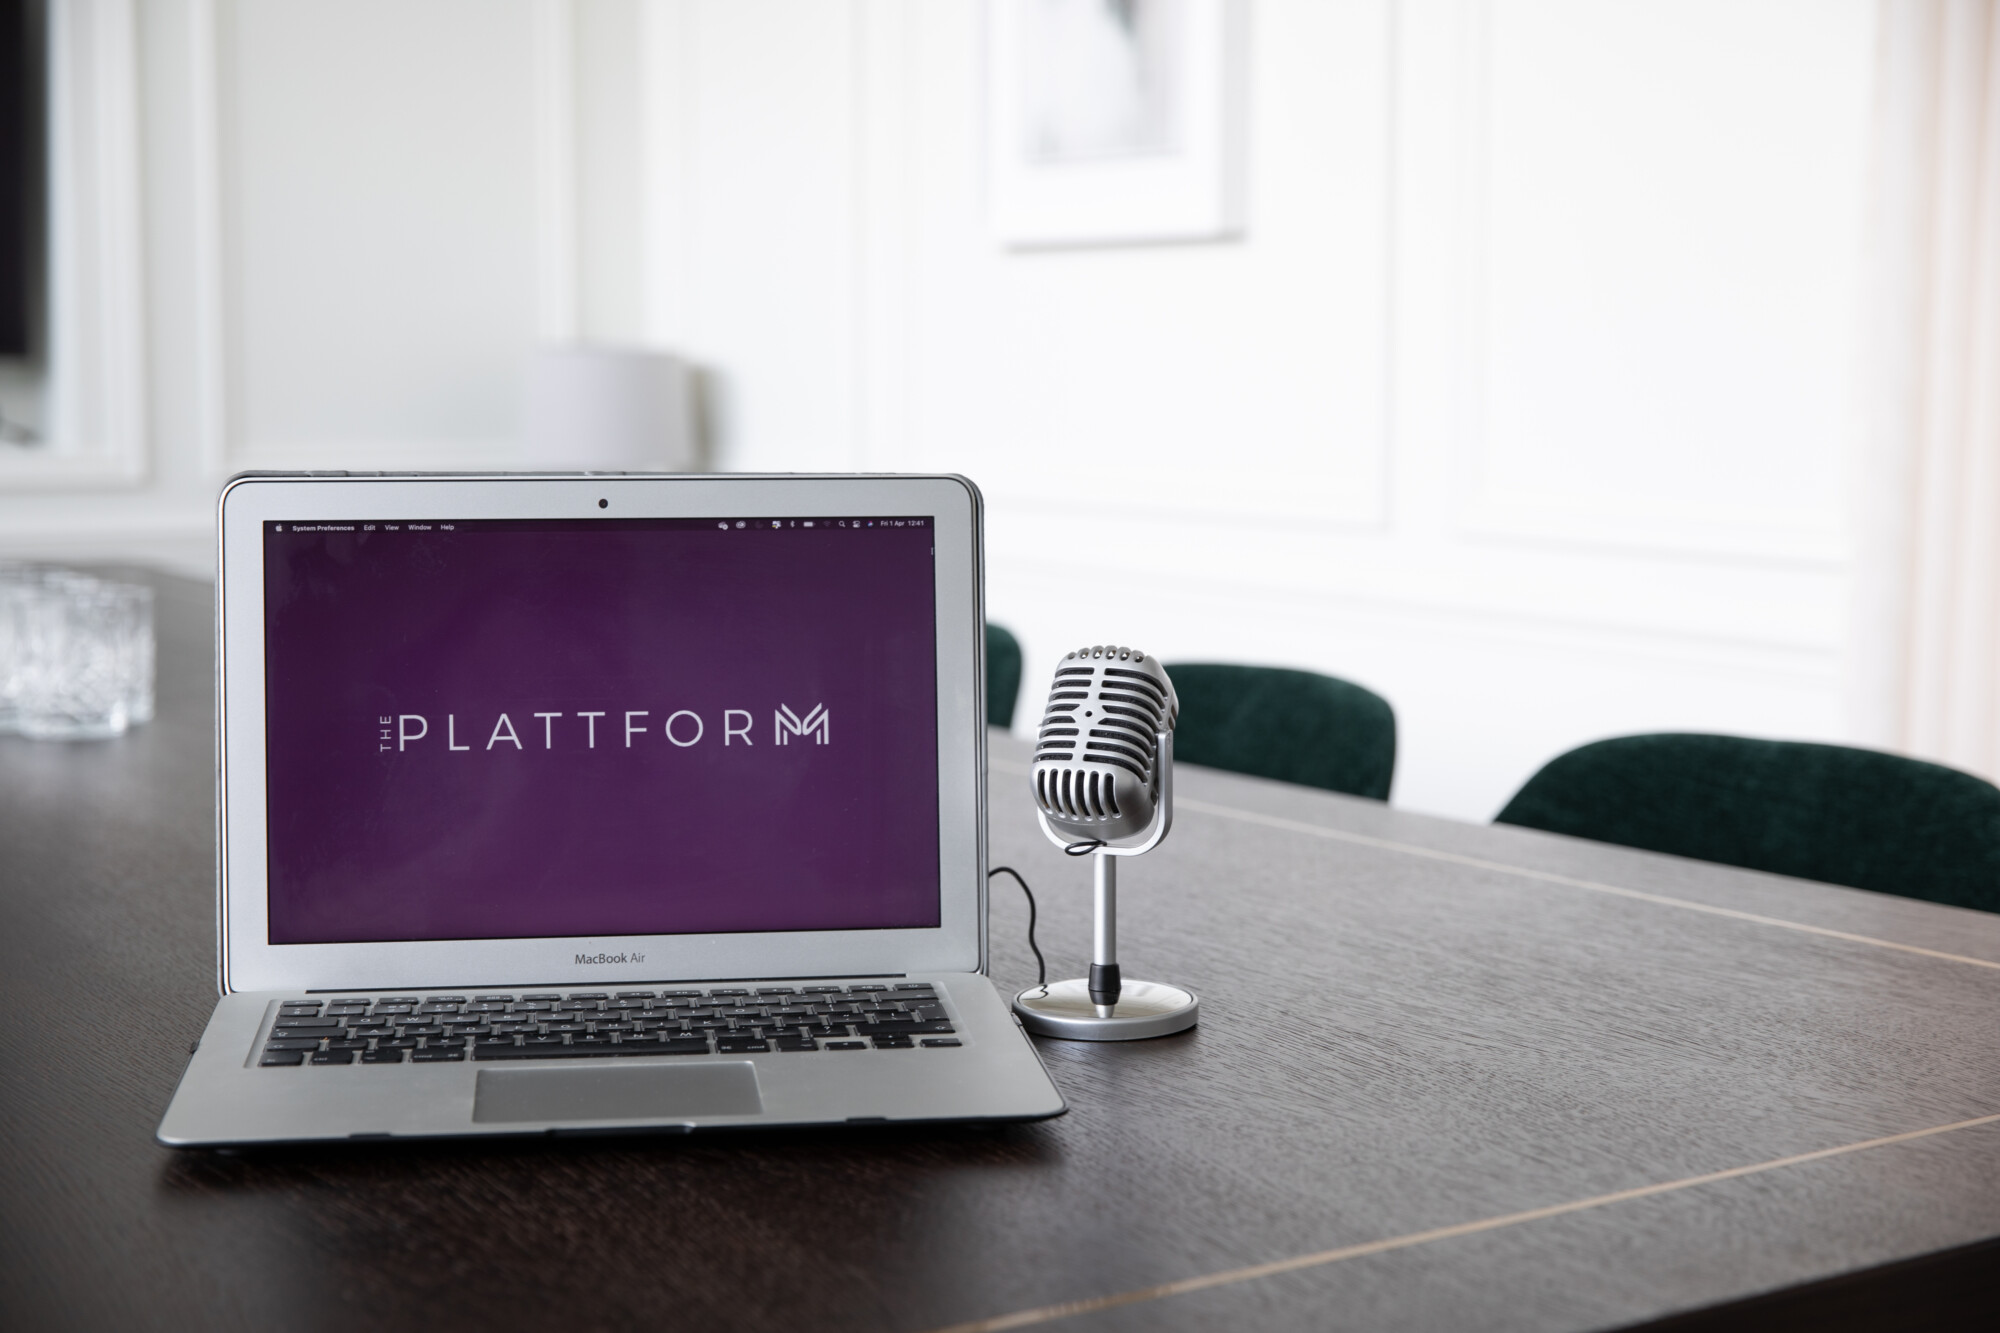 Podcast Services from The Plattform